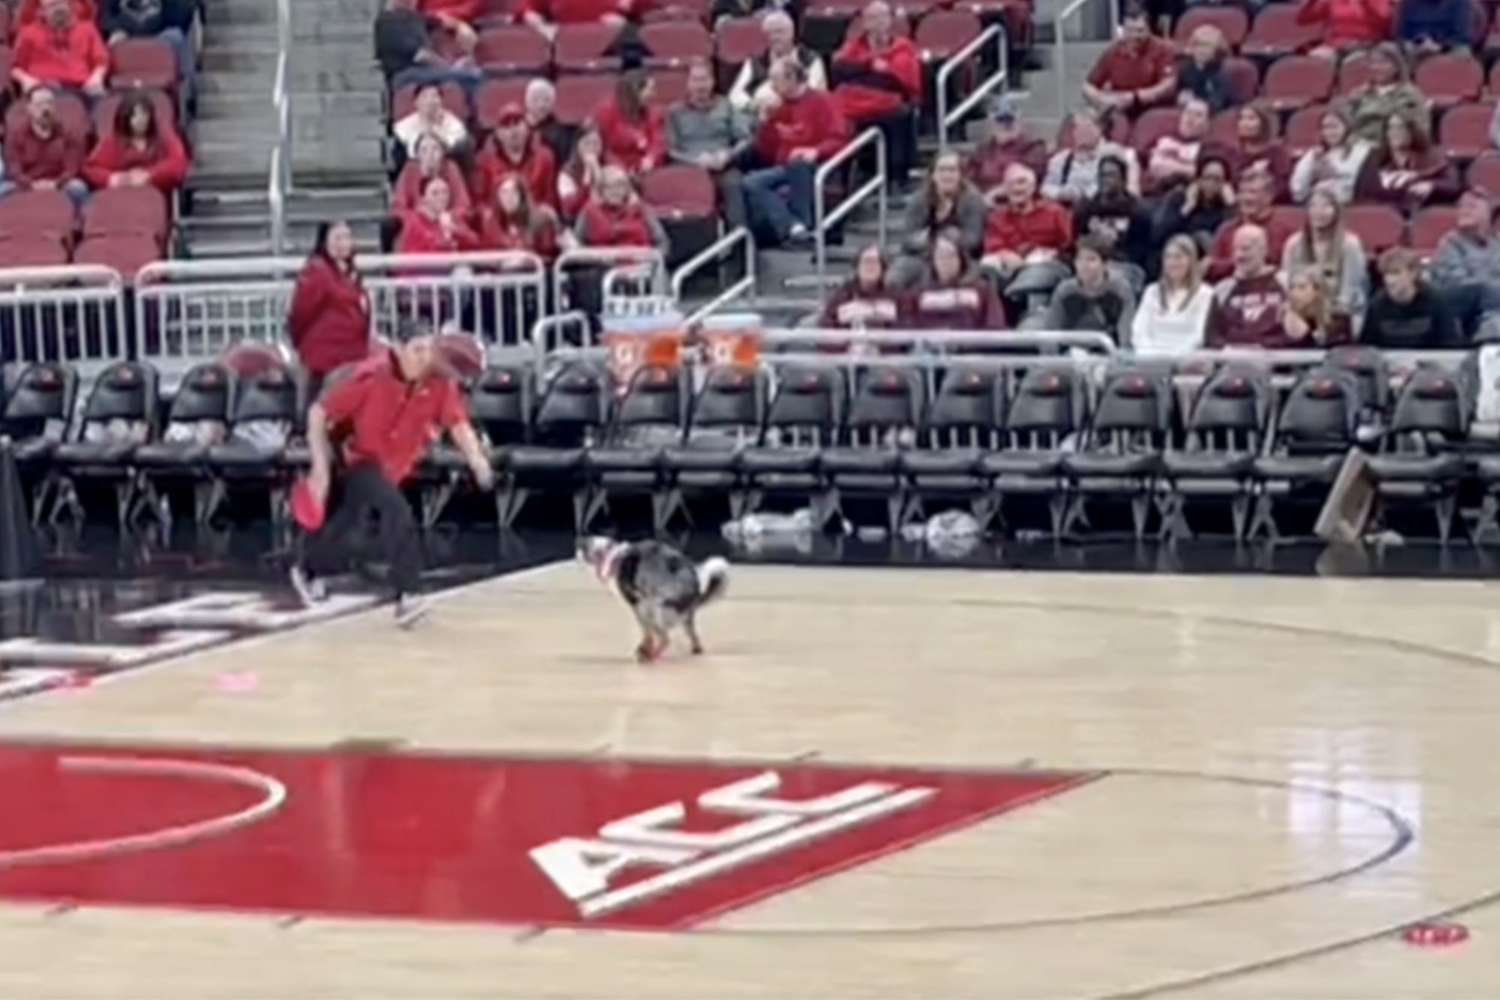 man rushes toward dog squatting to poop on basketball court